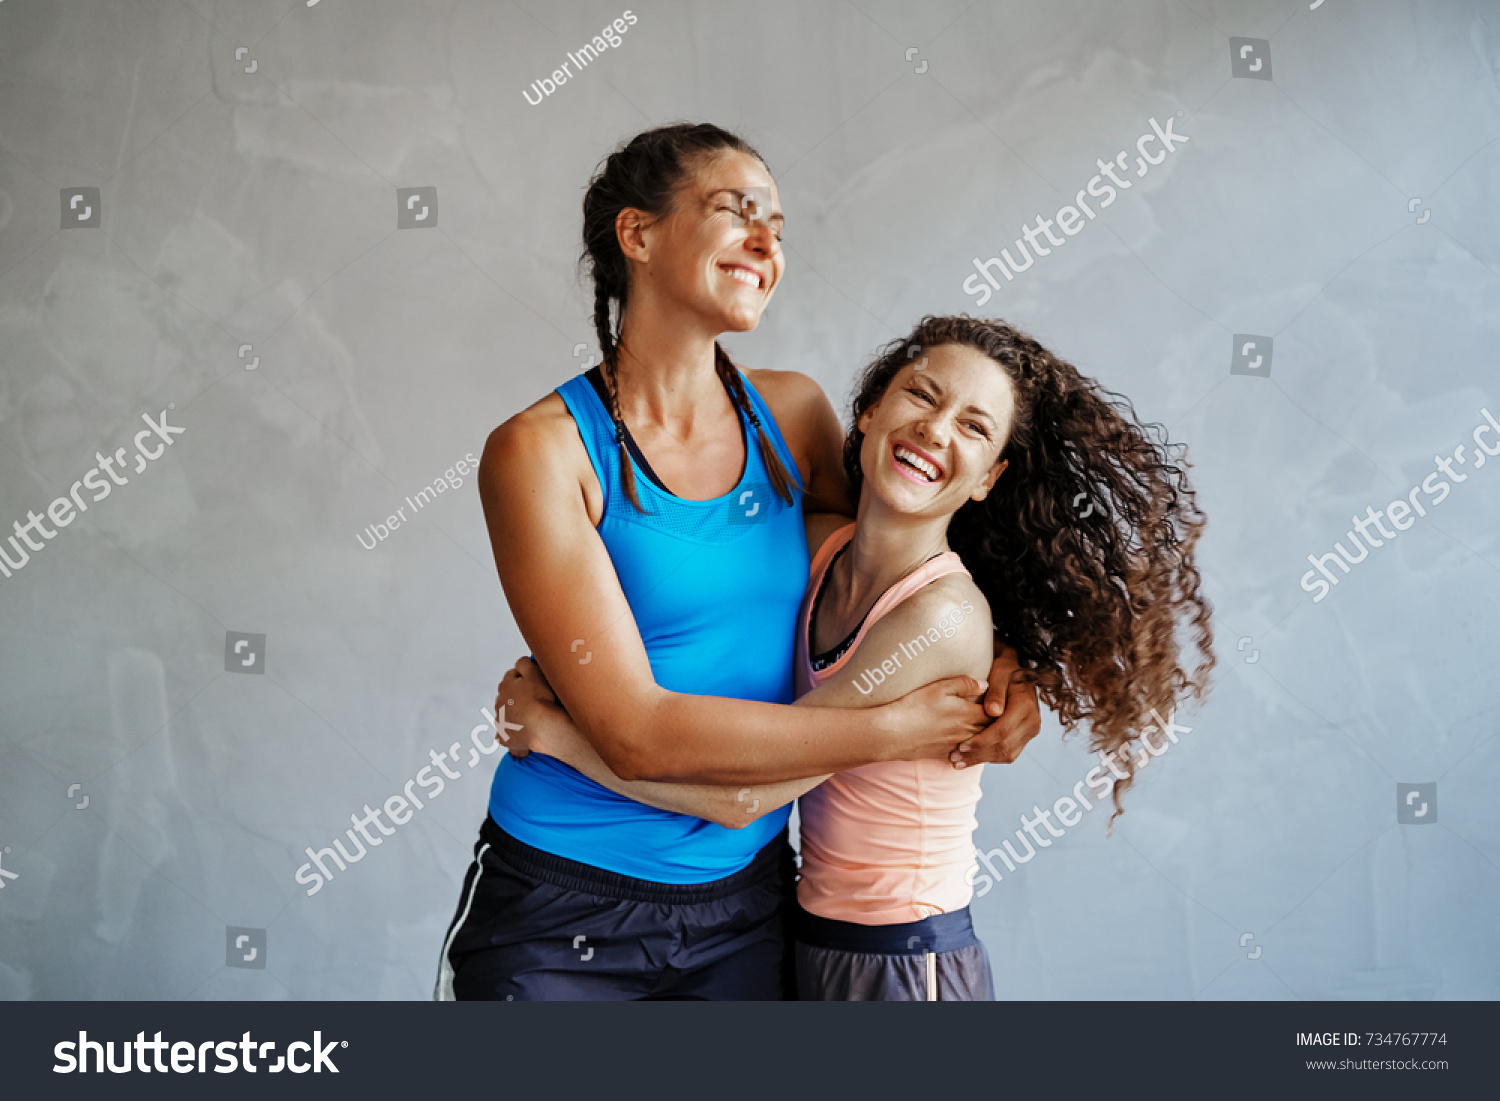 Two young women in sportswear laughing and standing arm in arm together in a gym #734767774